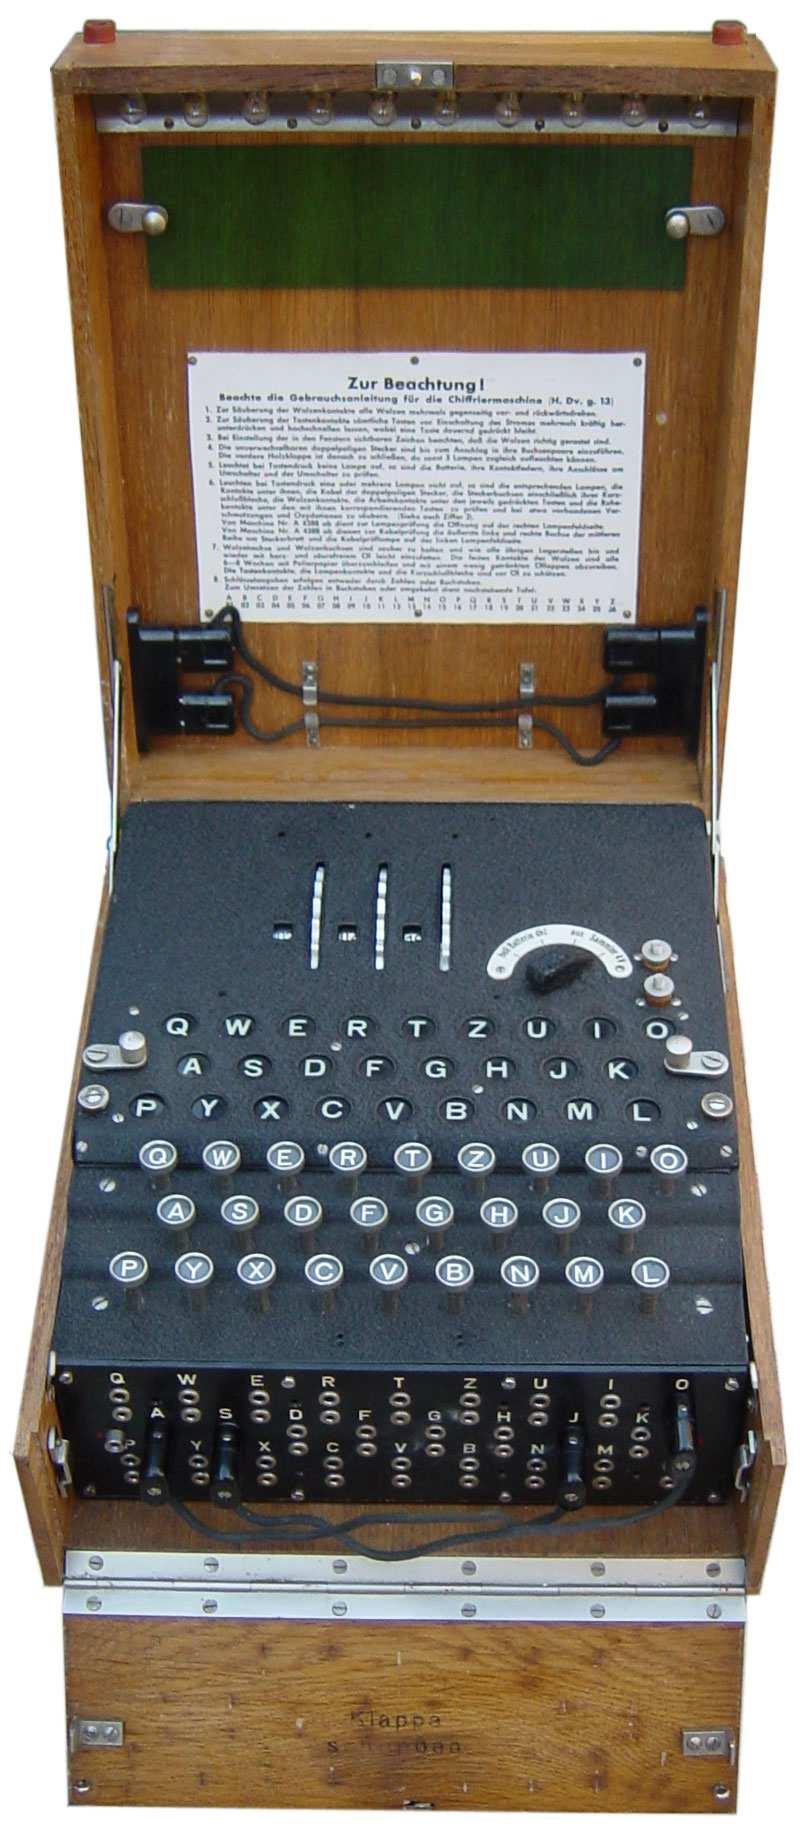 A famous example Enigma machine (1918-1945) electro-mechanical rotor cipher machines used by the German to encrypt during Wold War II permutations and substitutions A bit of history 1918: invention